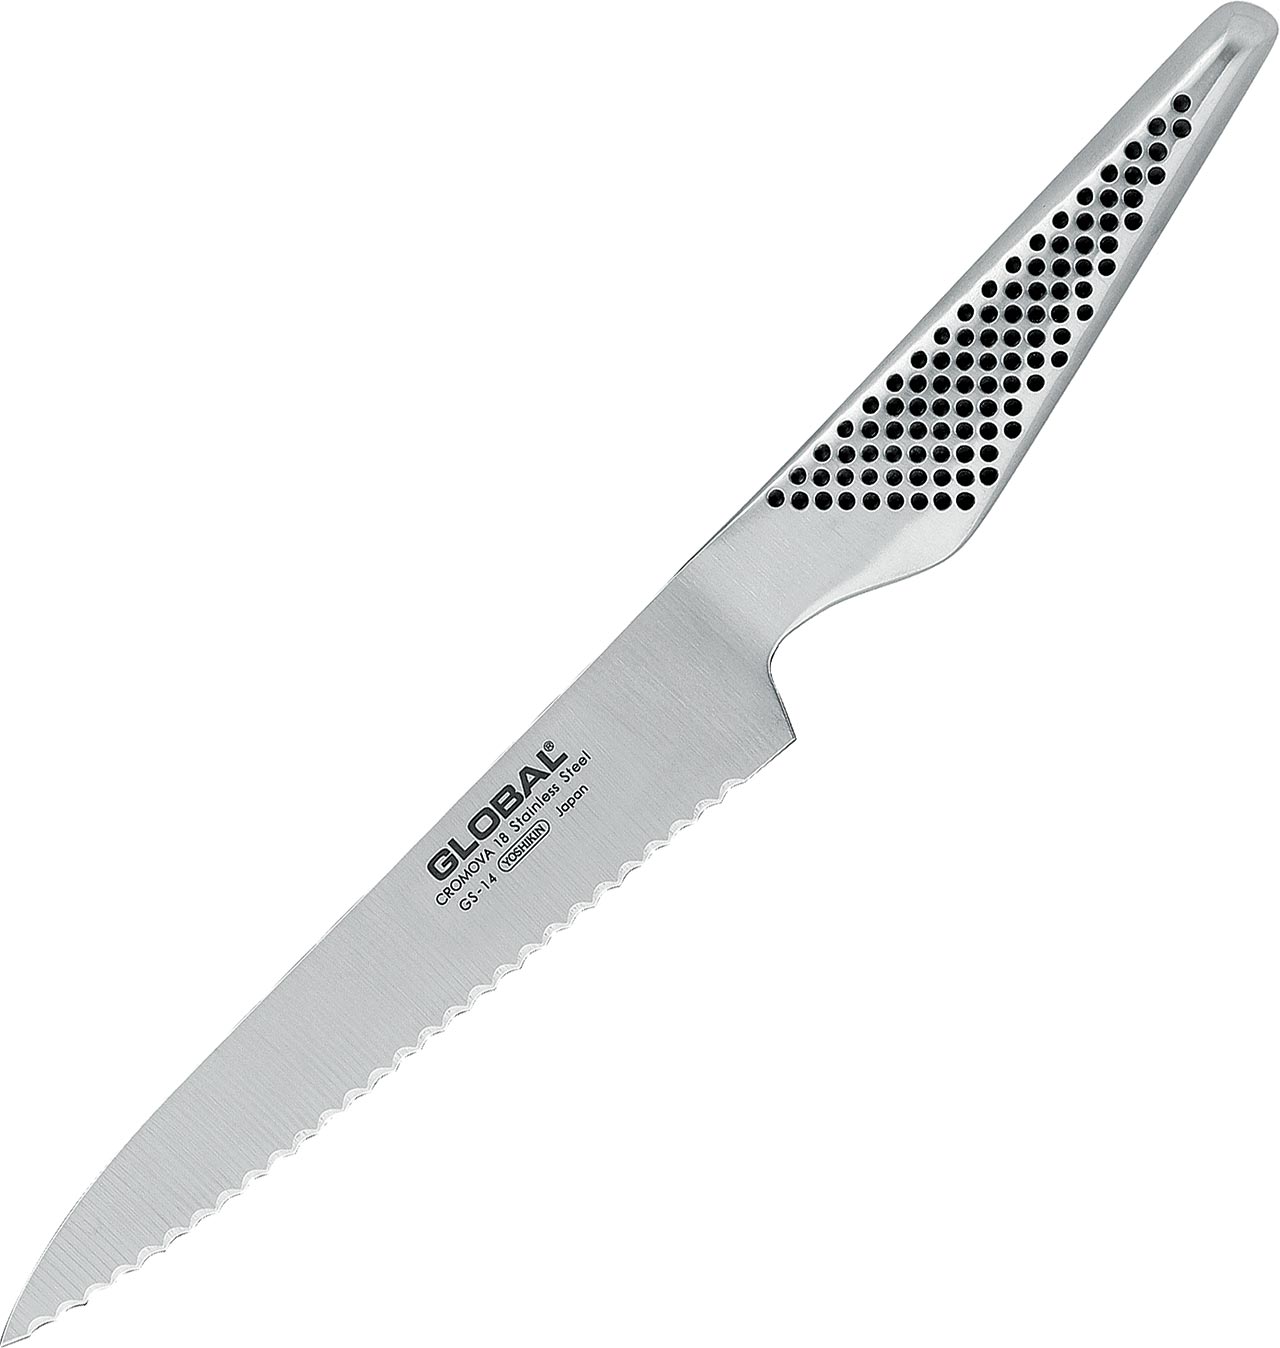 Global Scalloped Serrated Utility Knife 15cm GS-14